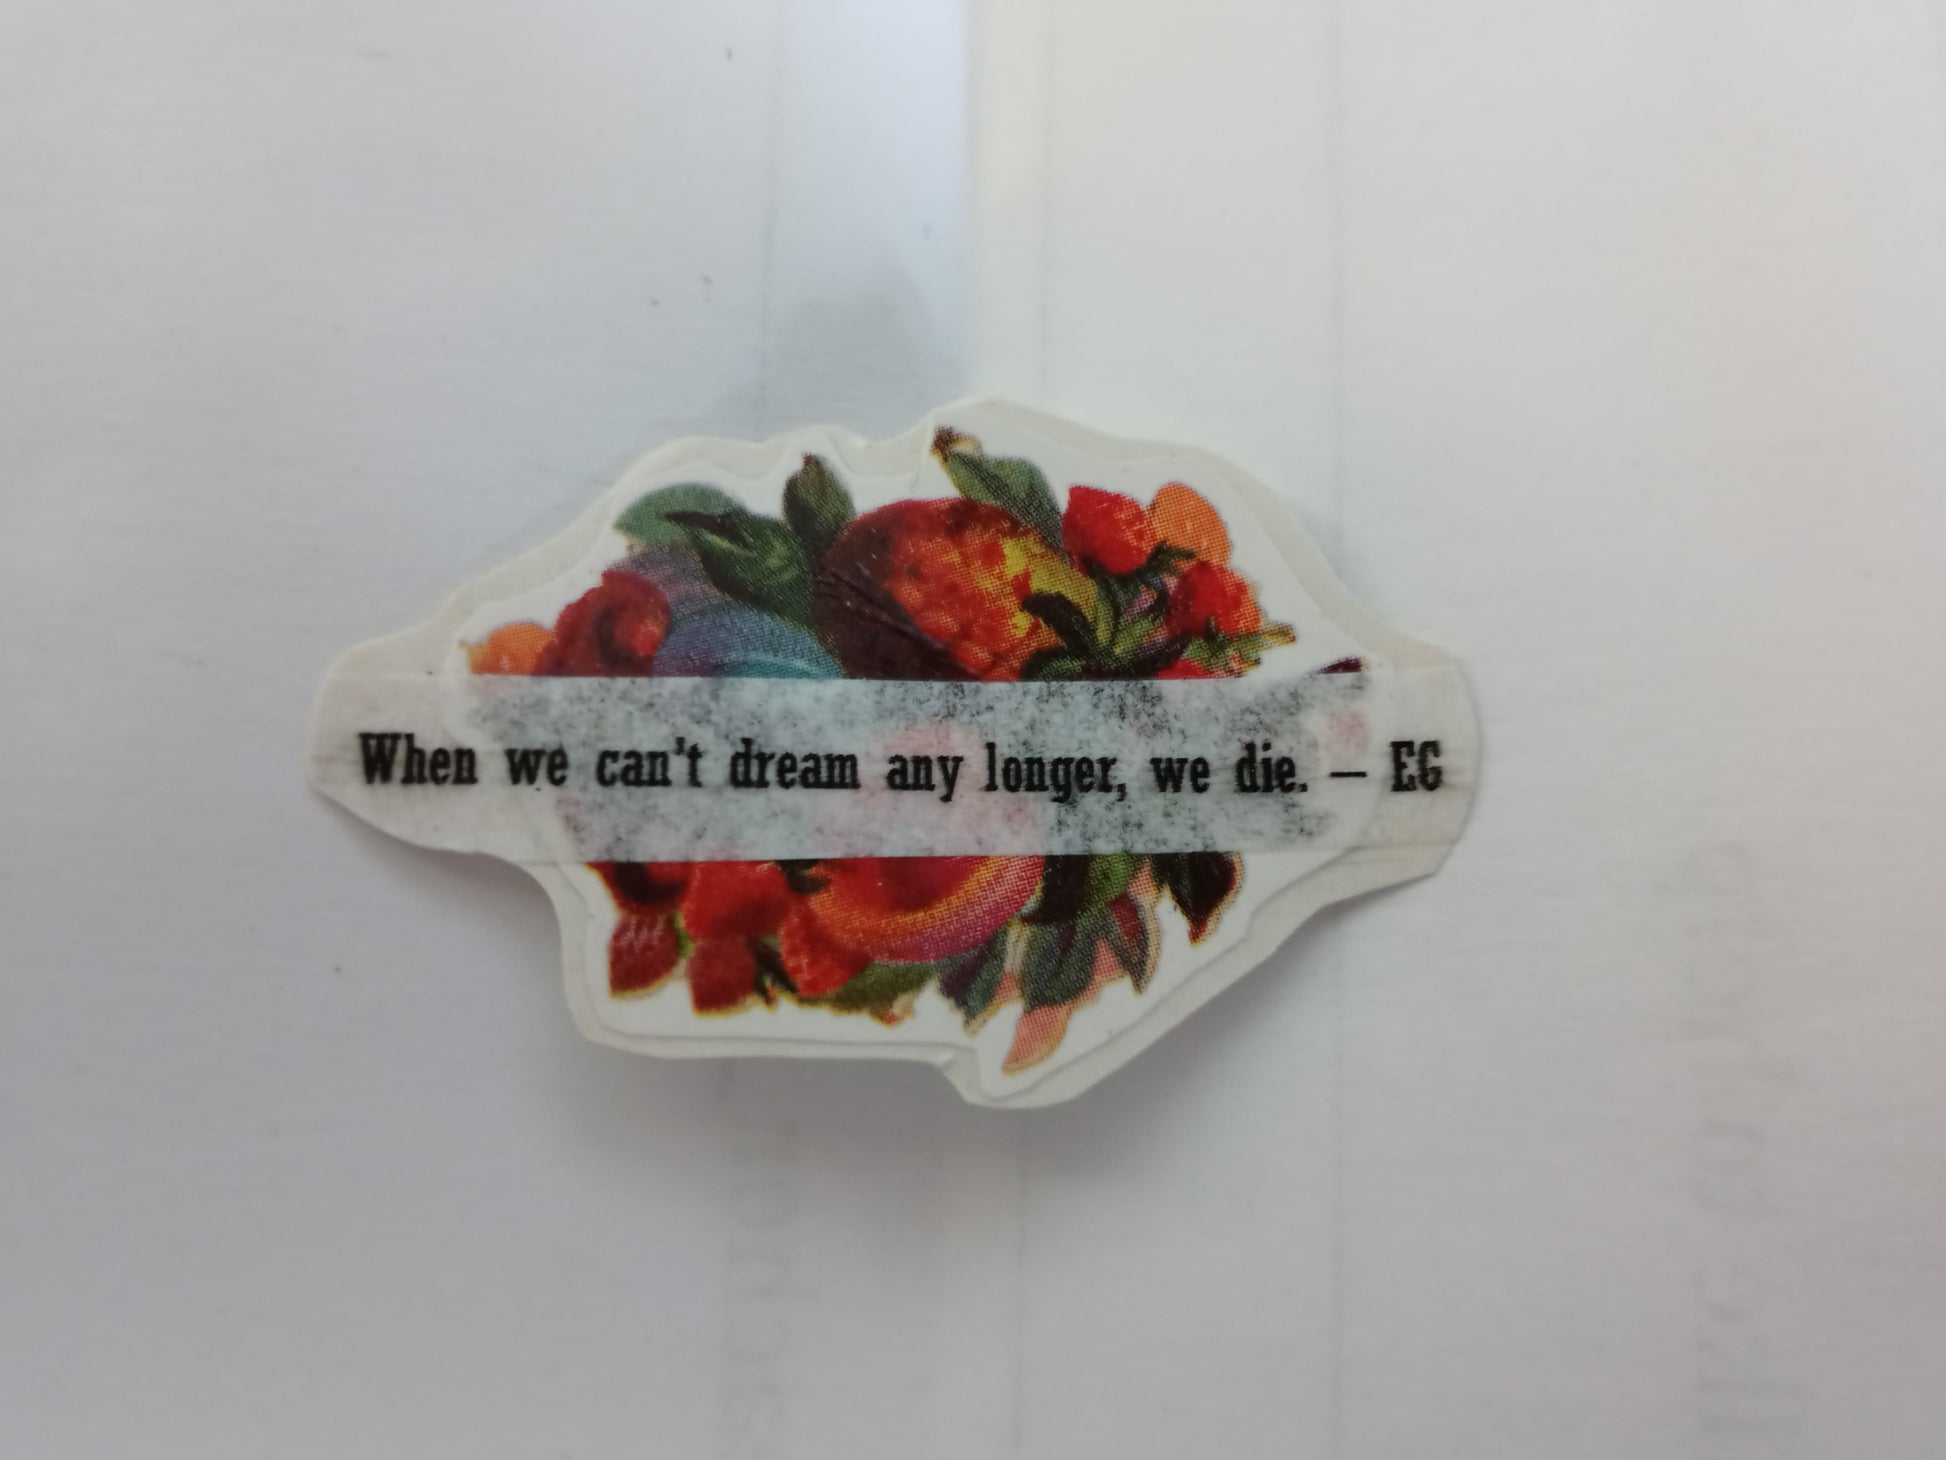 A very small handmade sticker of a Victorian era flower spray with a quote on white paper over top of it that reads "When we can't dream any longer, we die. - EG"